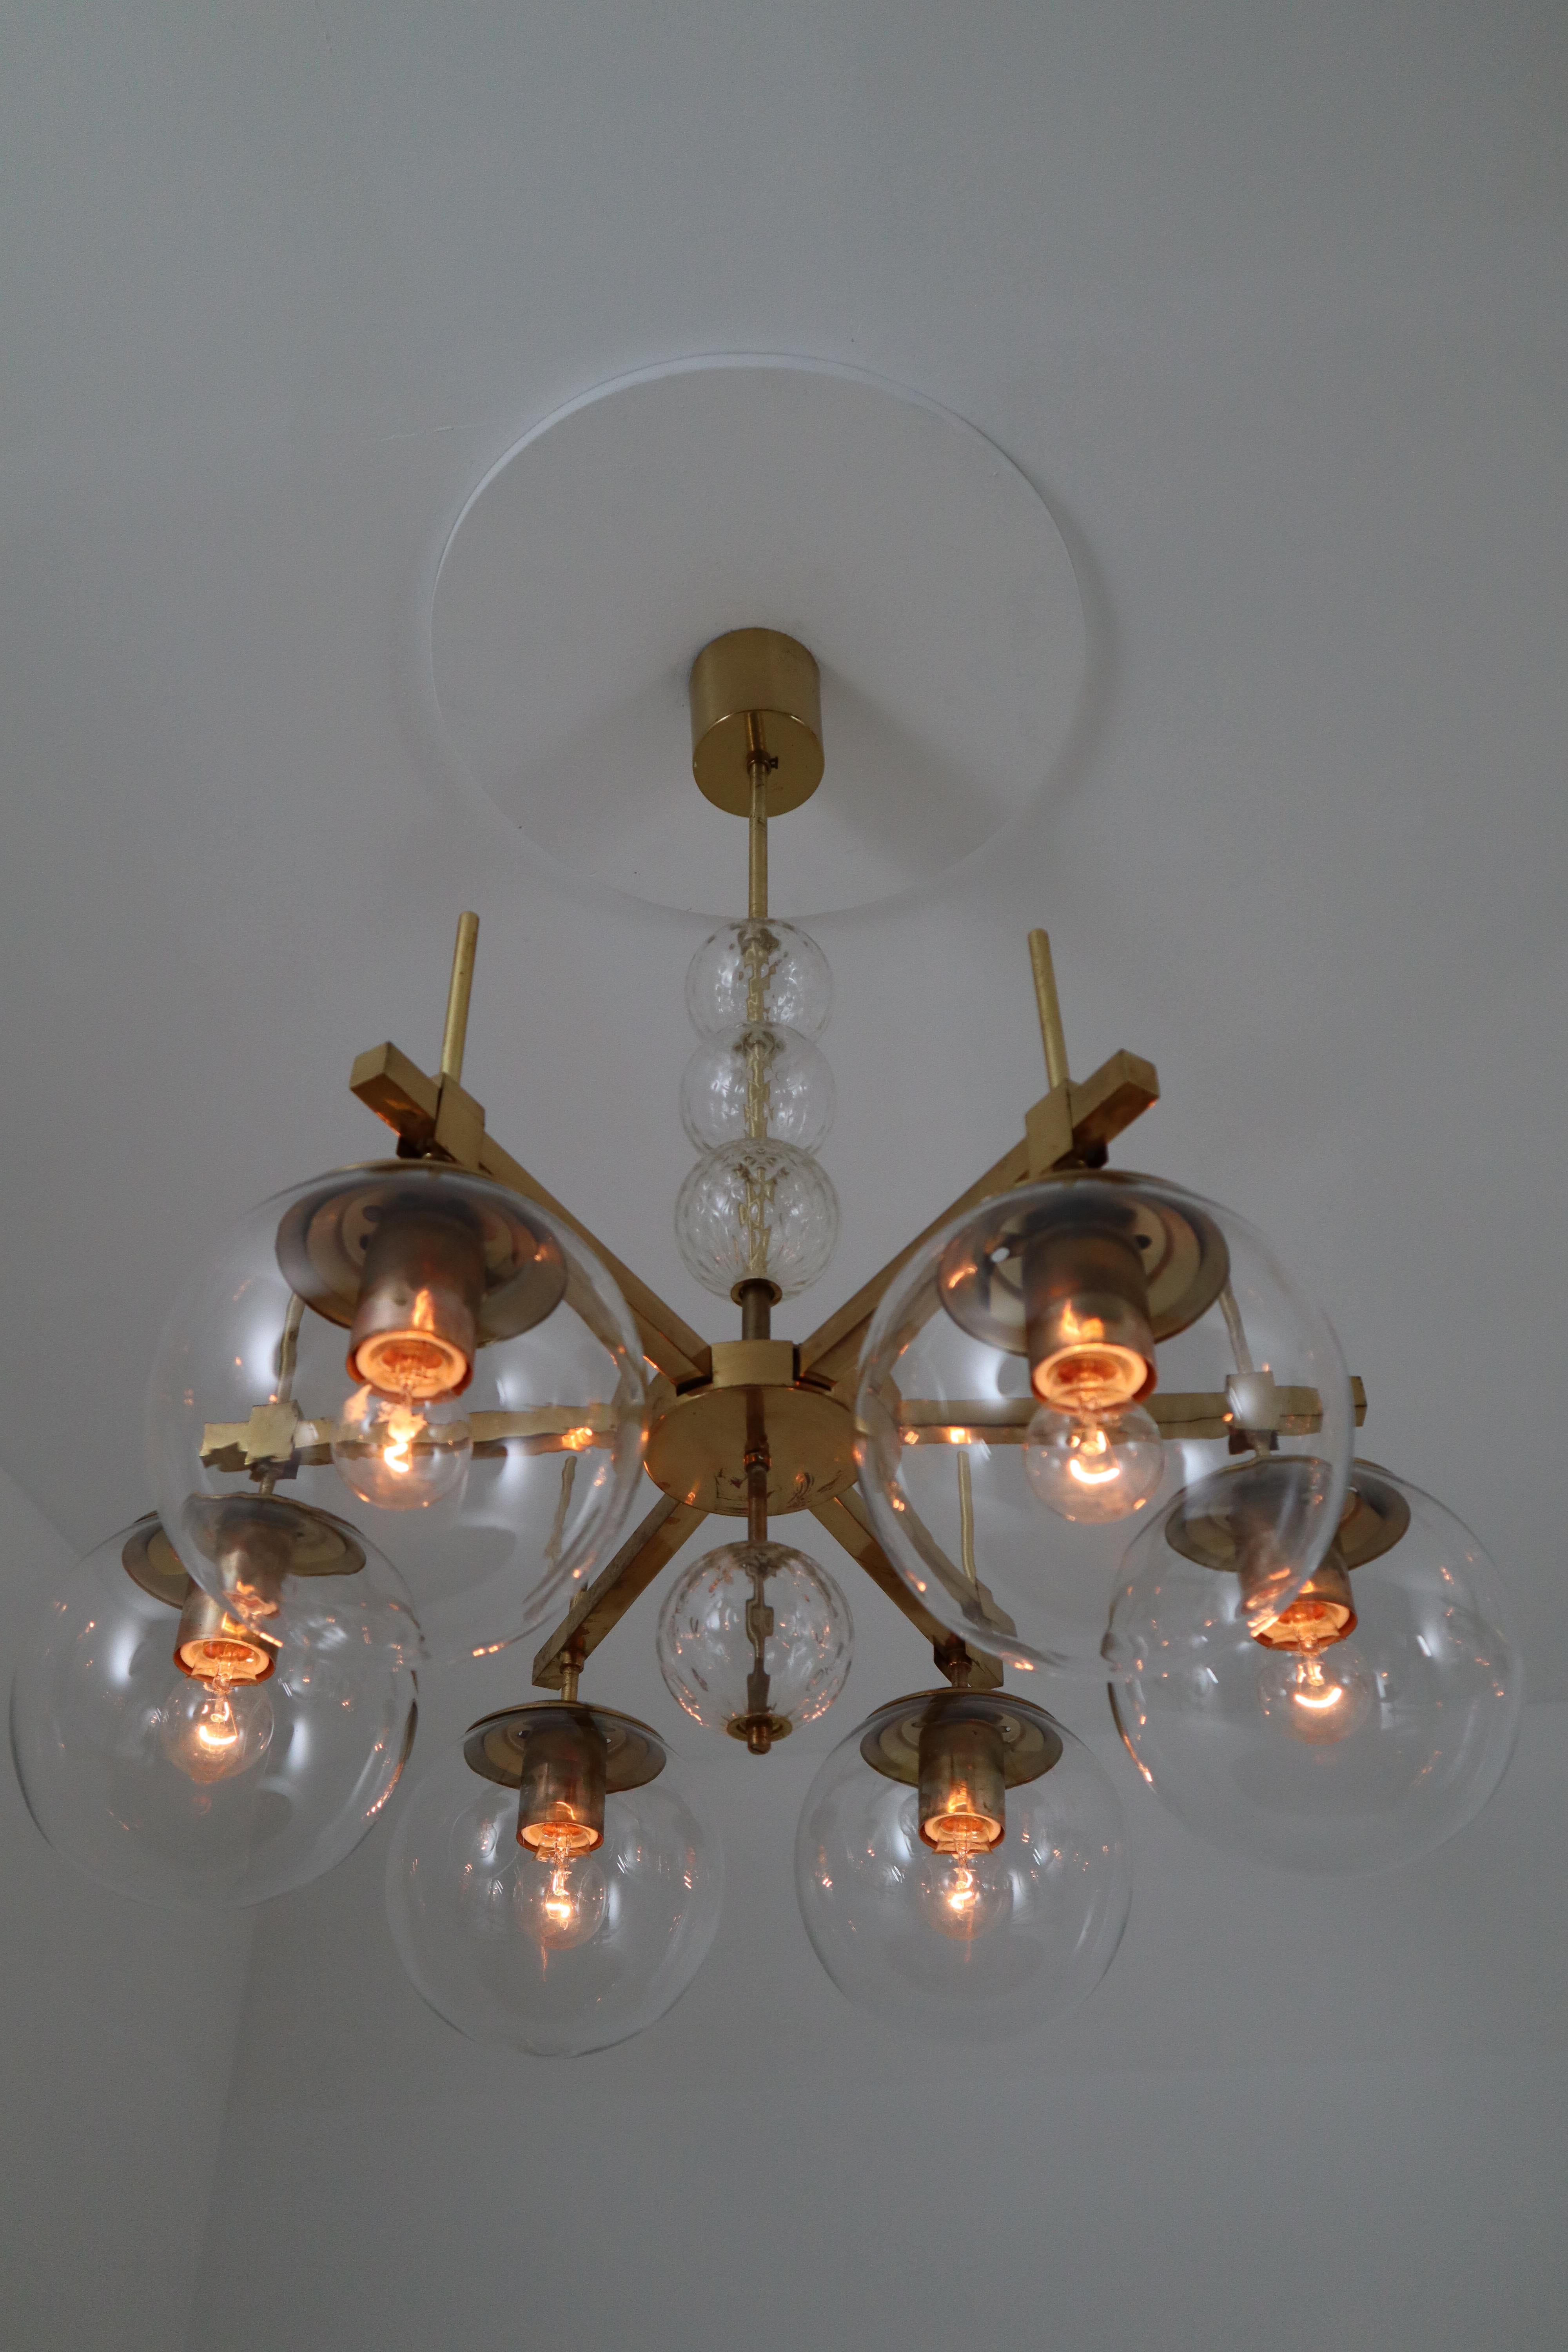 European Midcentury Chandelier with Brass Fixture and Hand Blown Glass, Europe